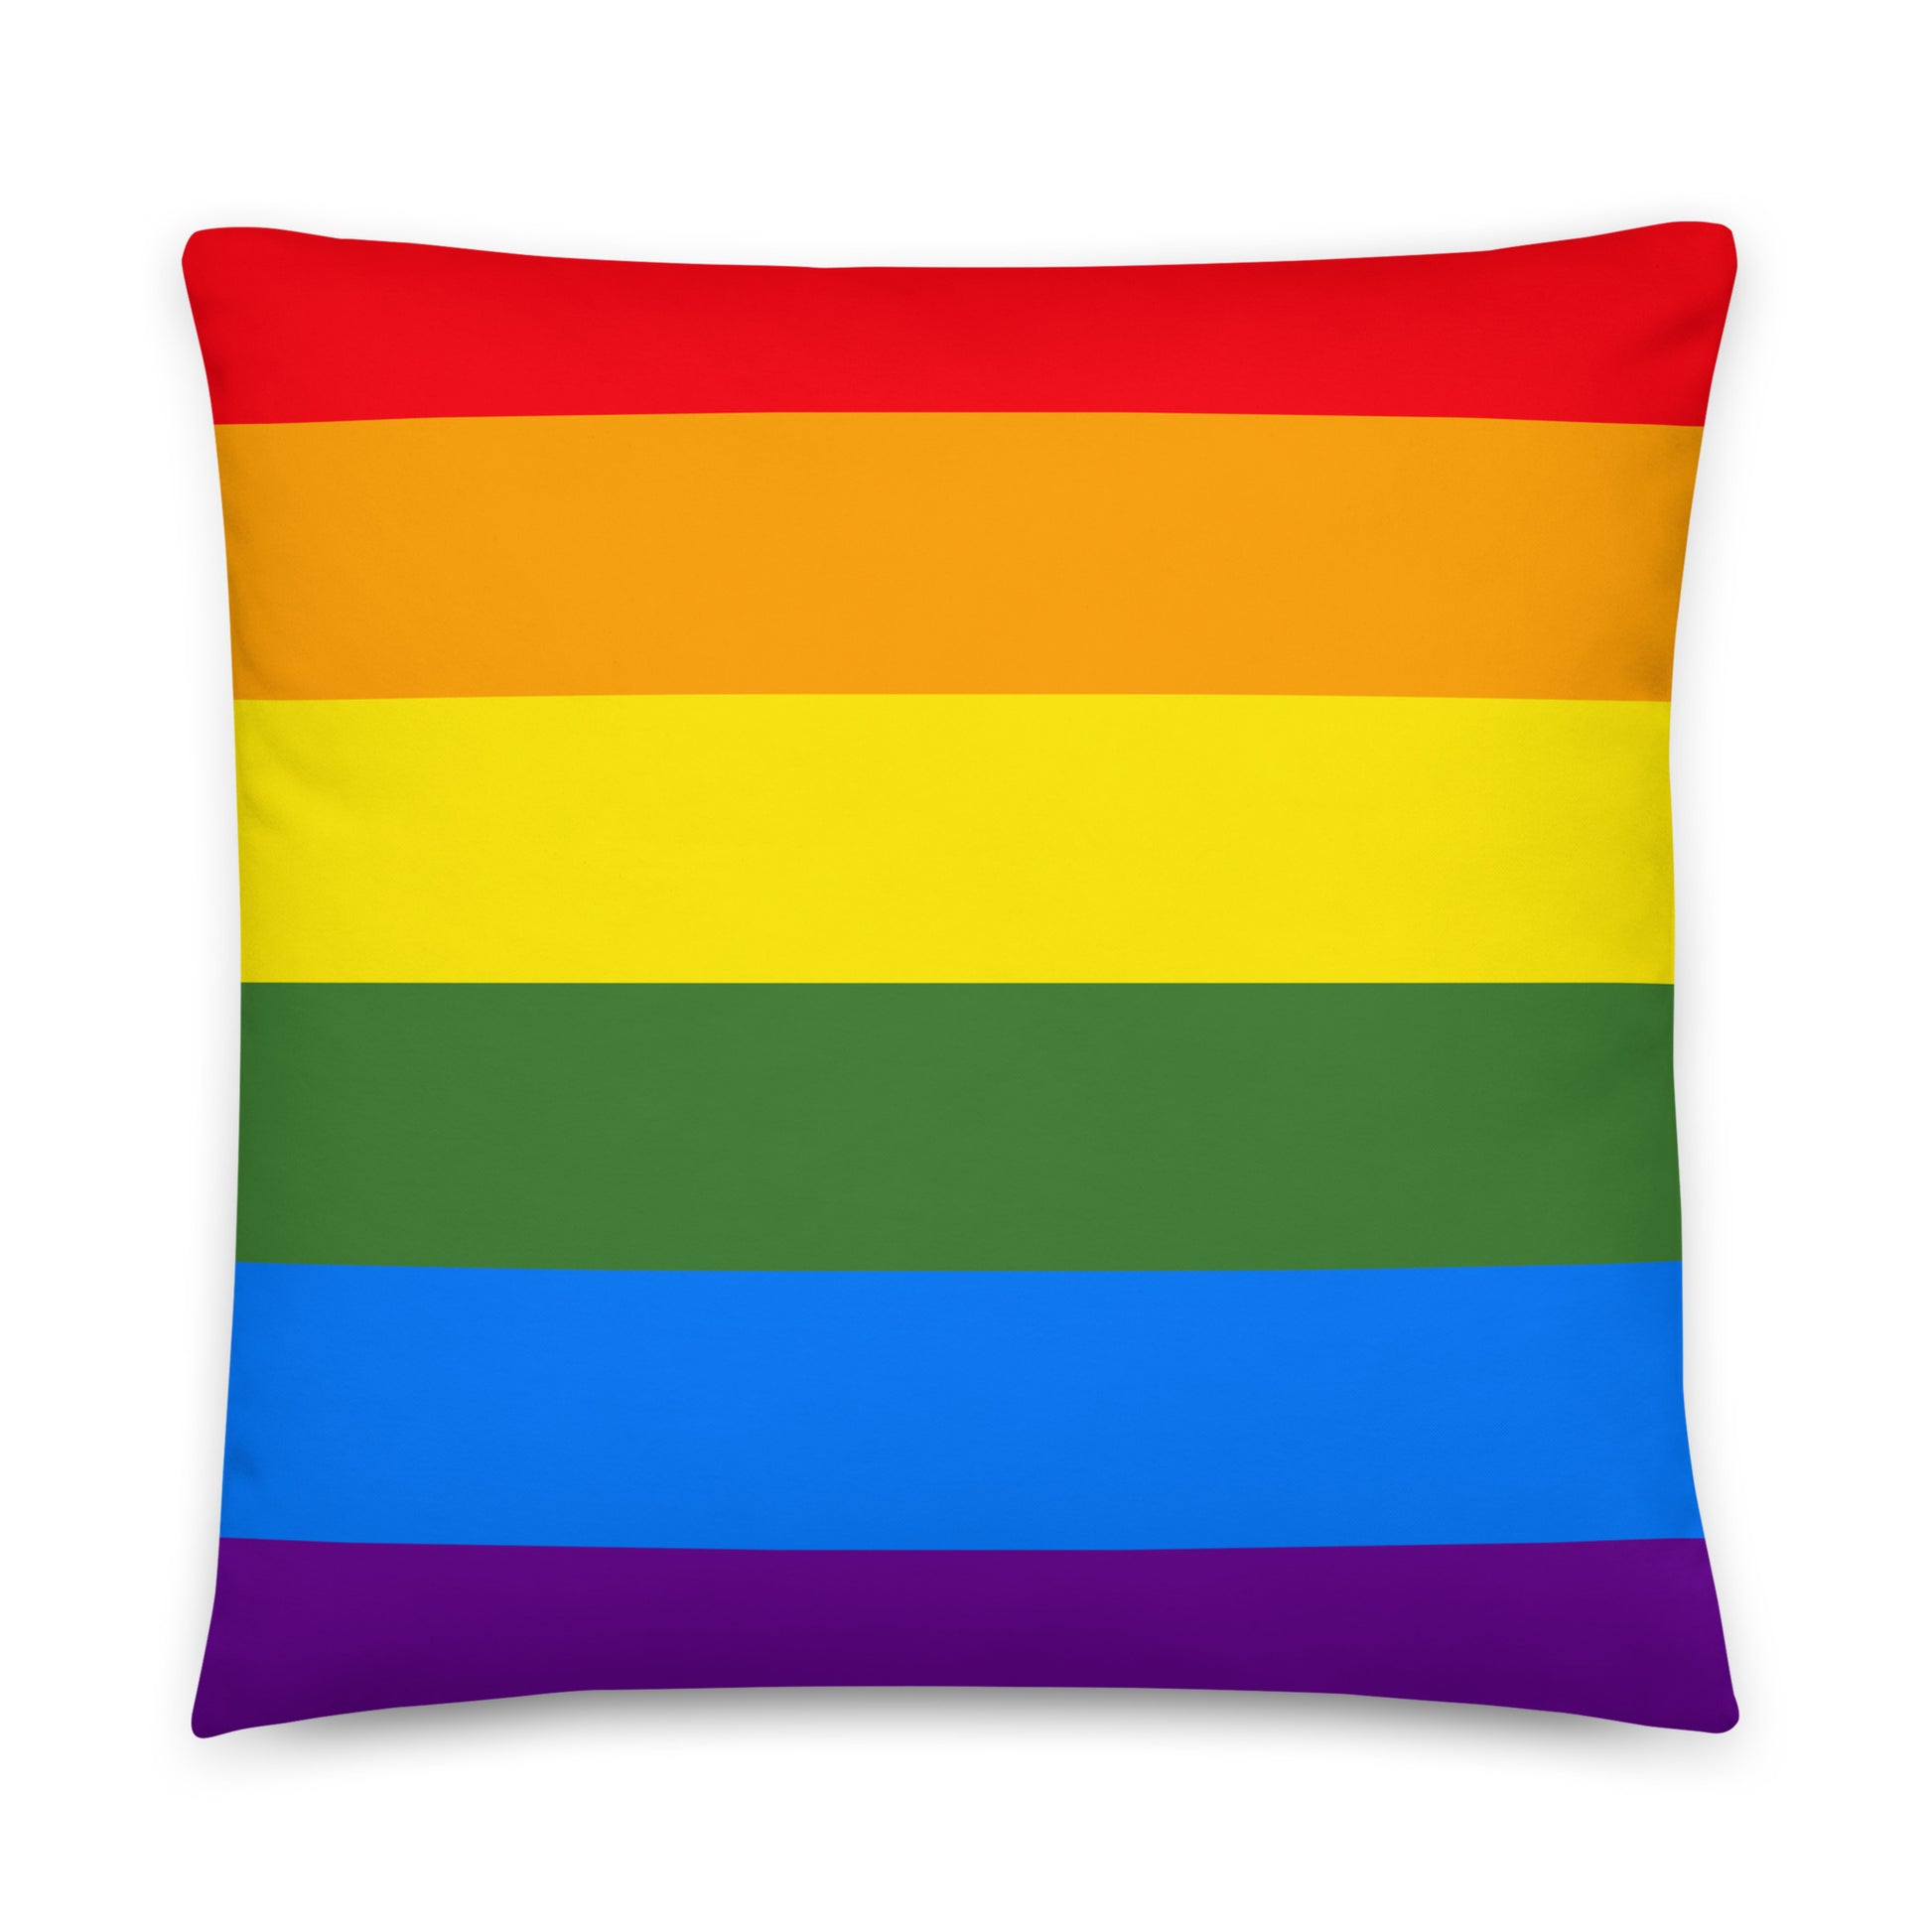 Rainbow Throw Pillow • PIT Pittsburgh • YHM Designs - Image 02